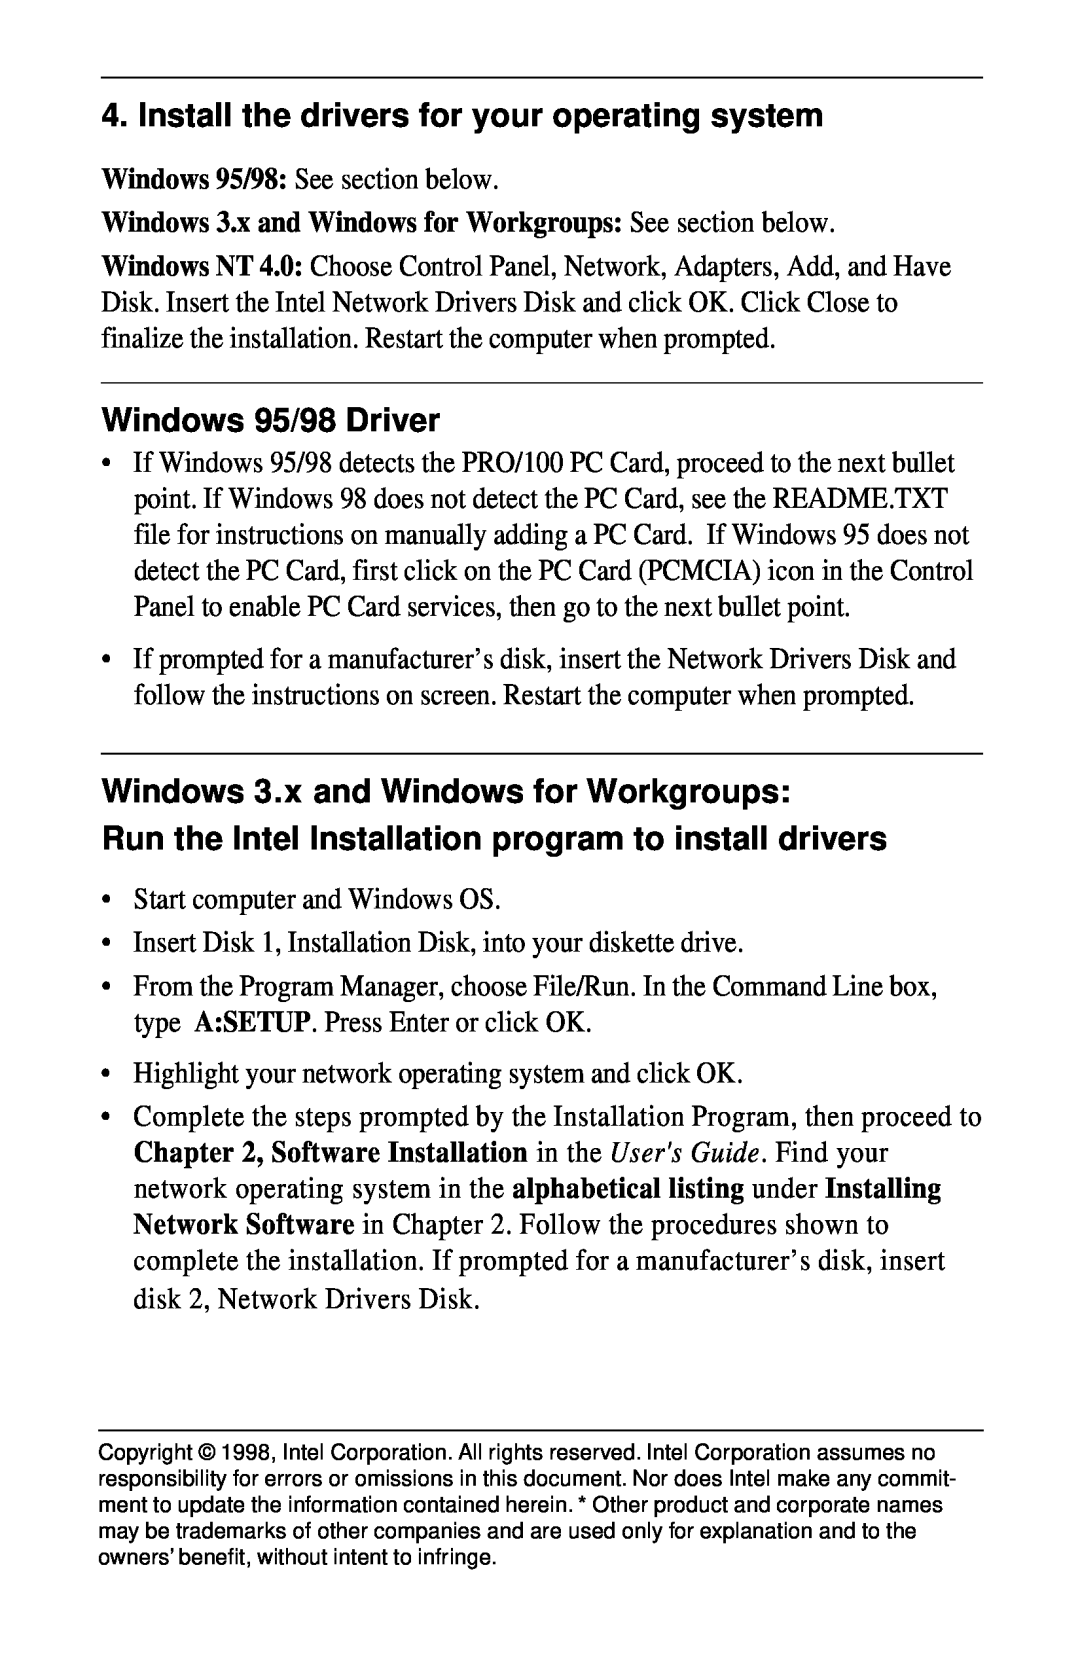 Intel PRO/100 Install the drivers for your operating system, Windows 95/98 Driver, Windows 3.x and Windows for Workgroups 